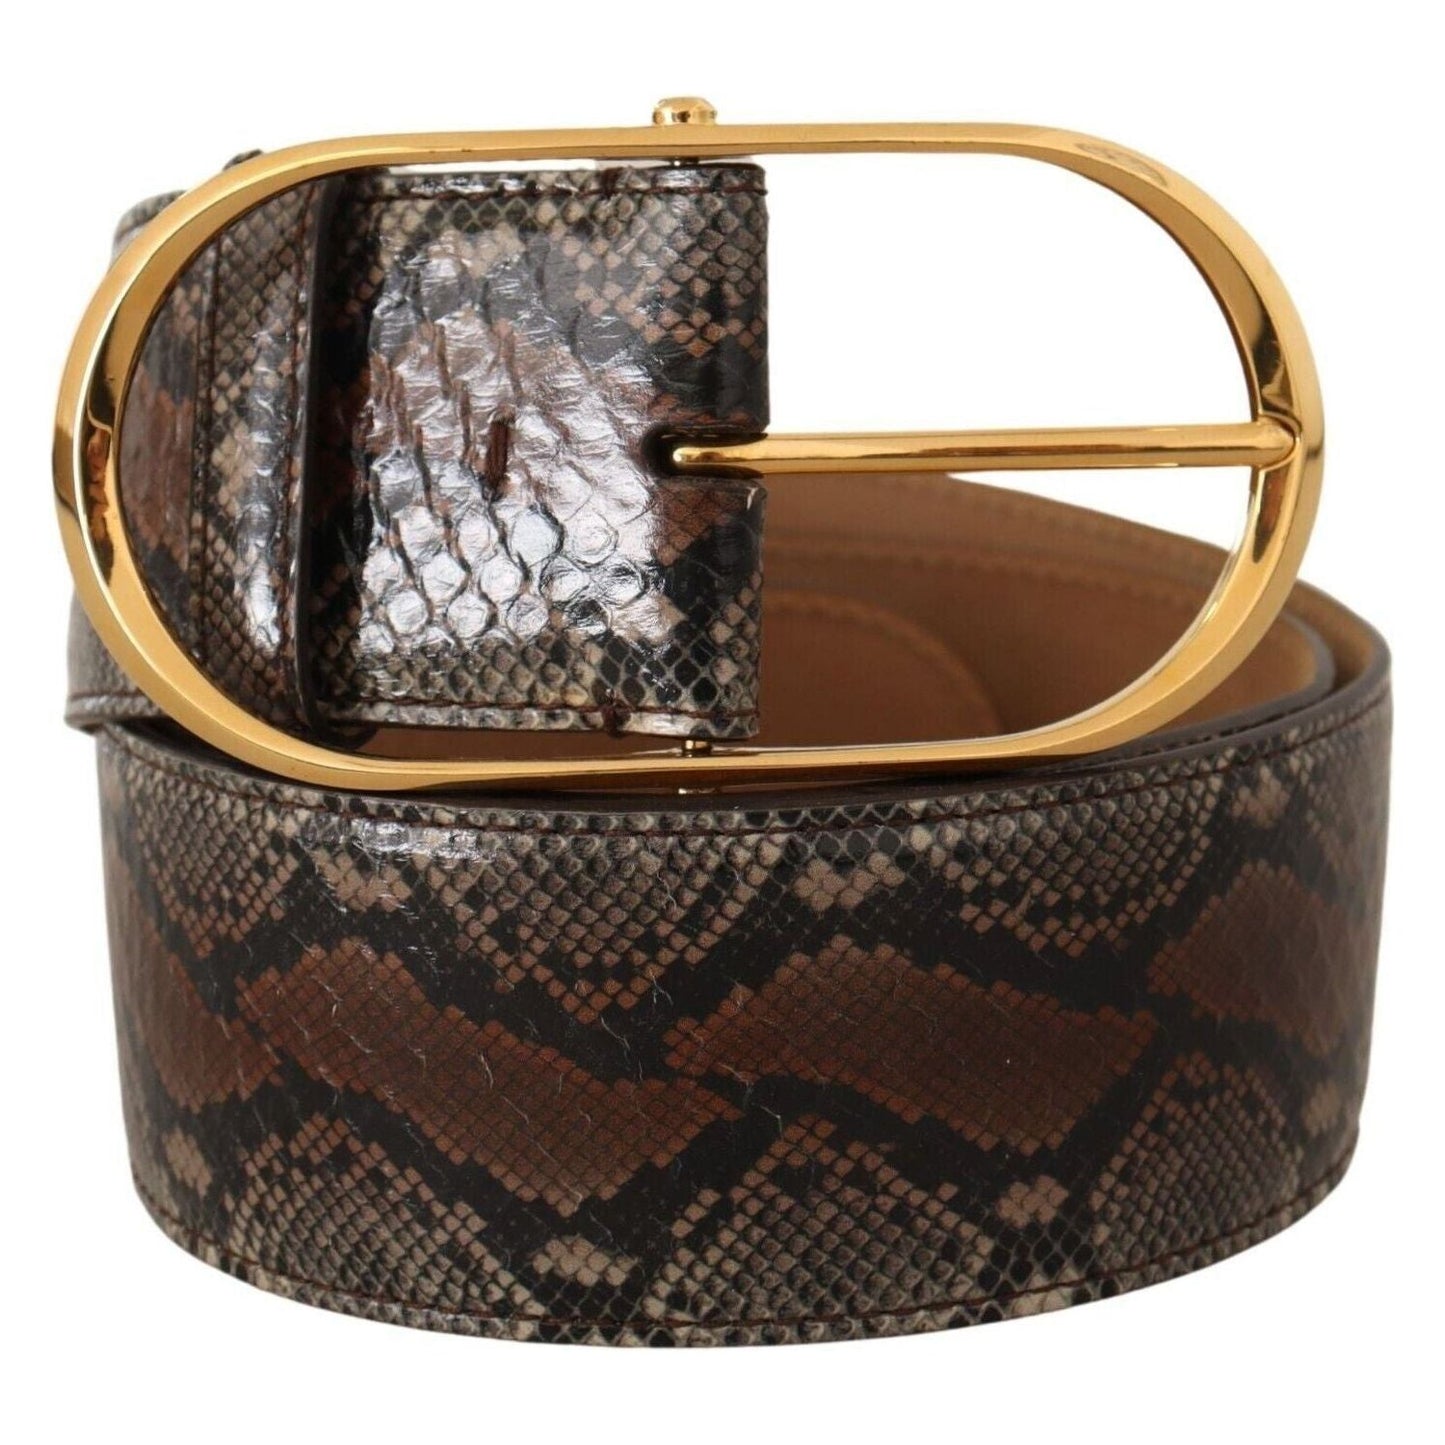 Dolce & Gabbana Elegant Brown Leather Belt with Gold Buckle brown-exotic-leather-gold-oval-buckle-belt-5 WOMAN BELTS